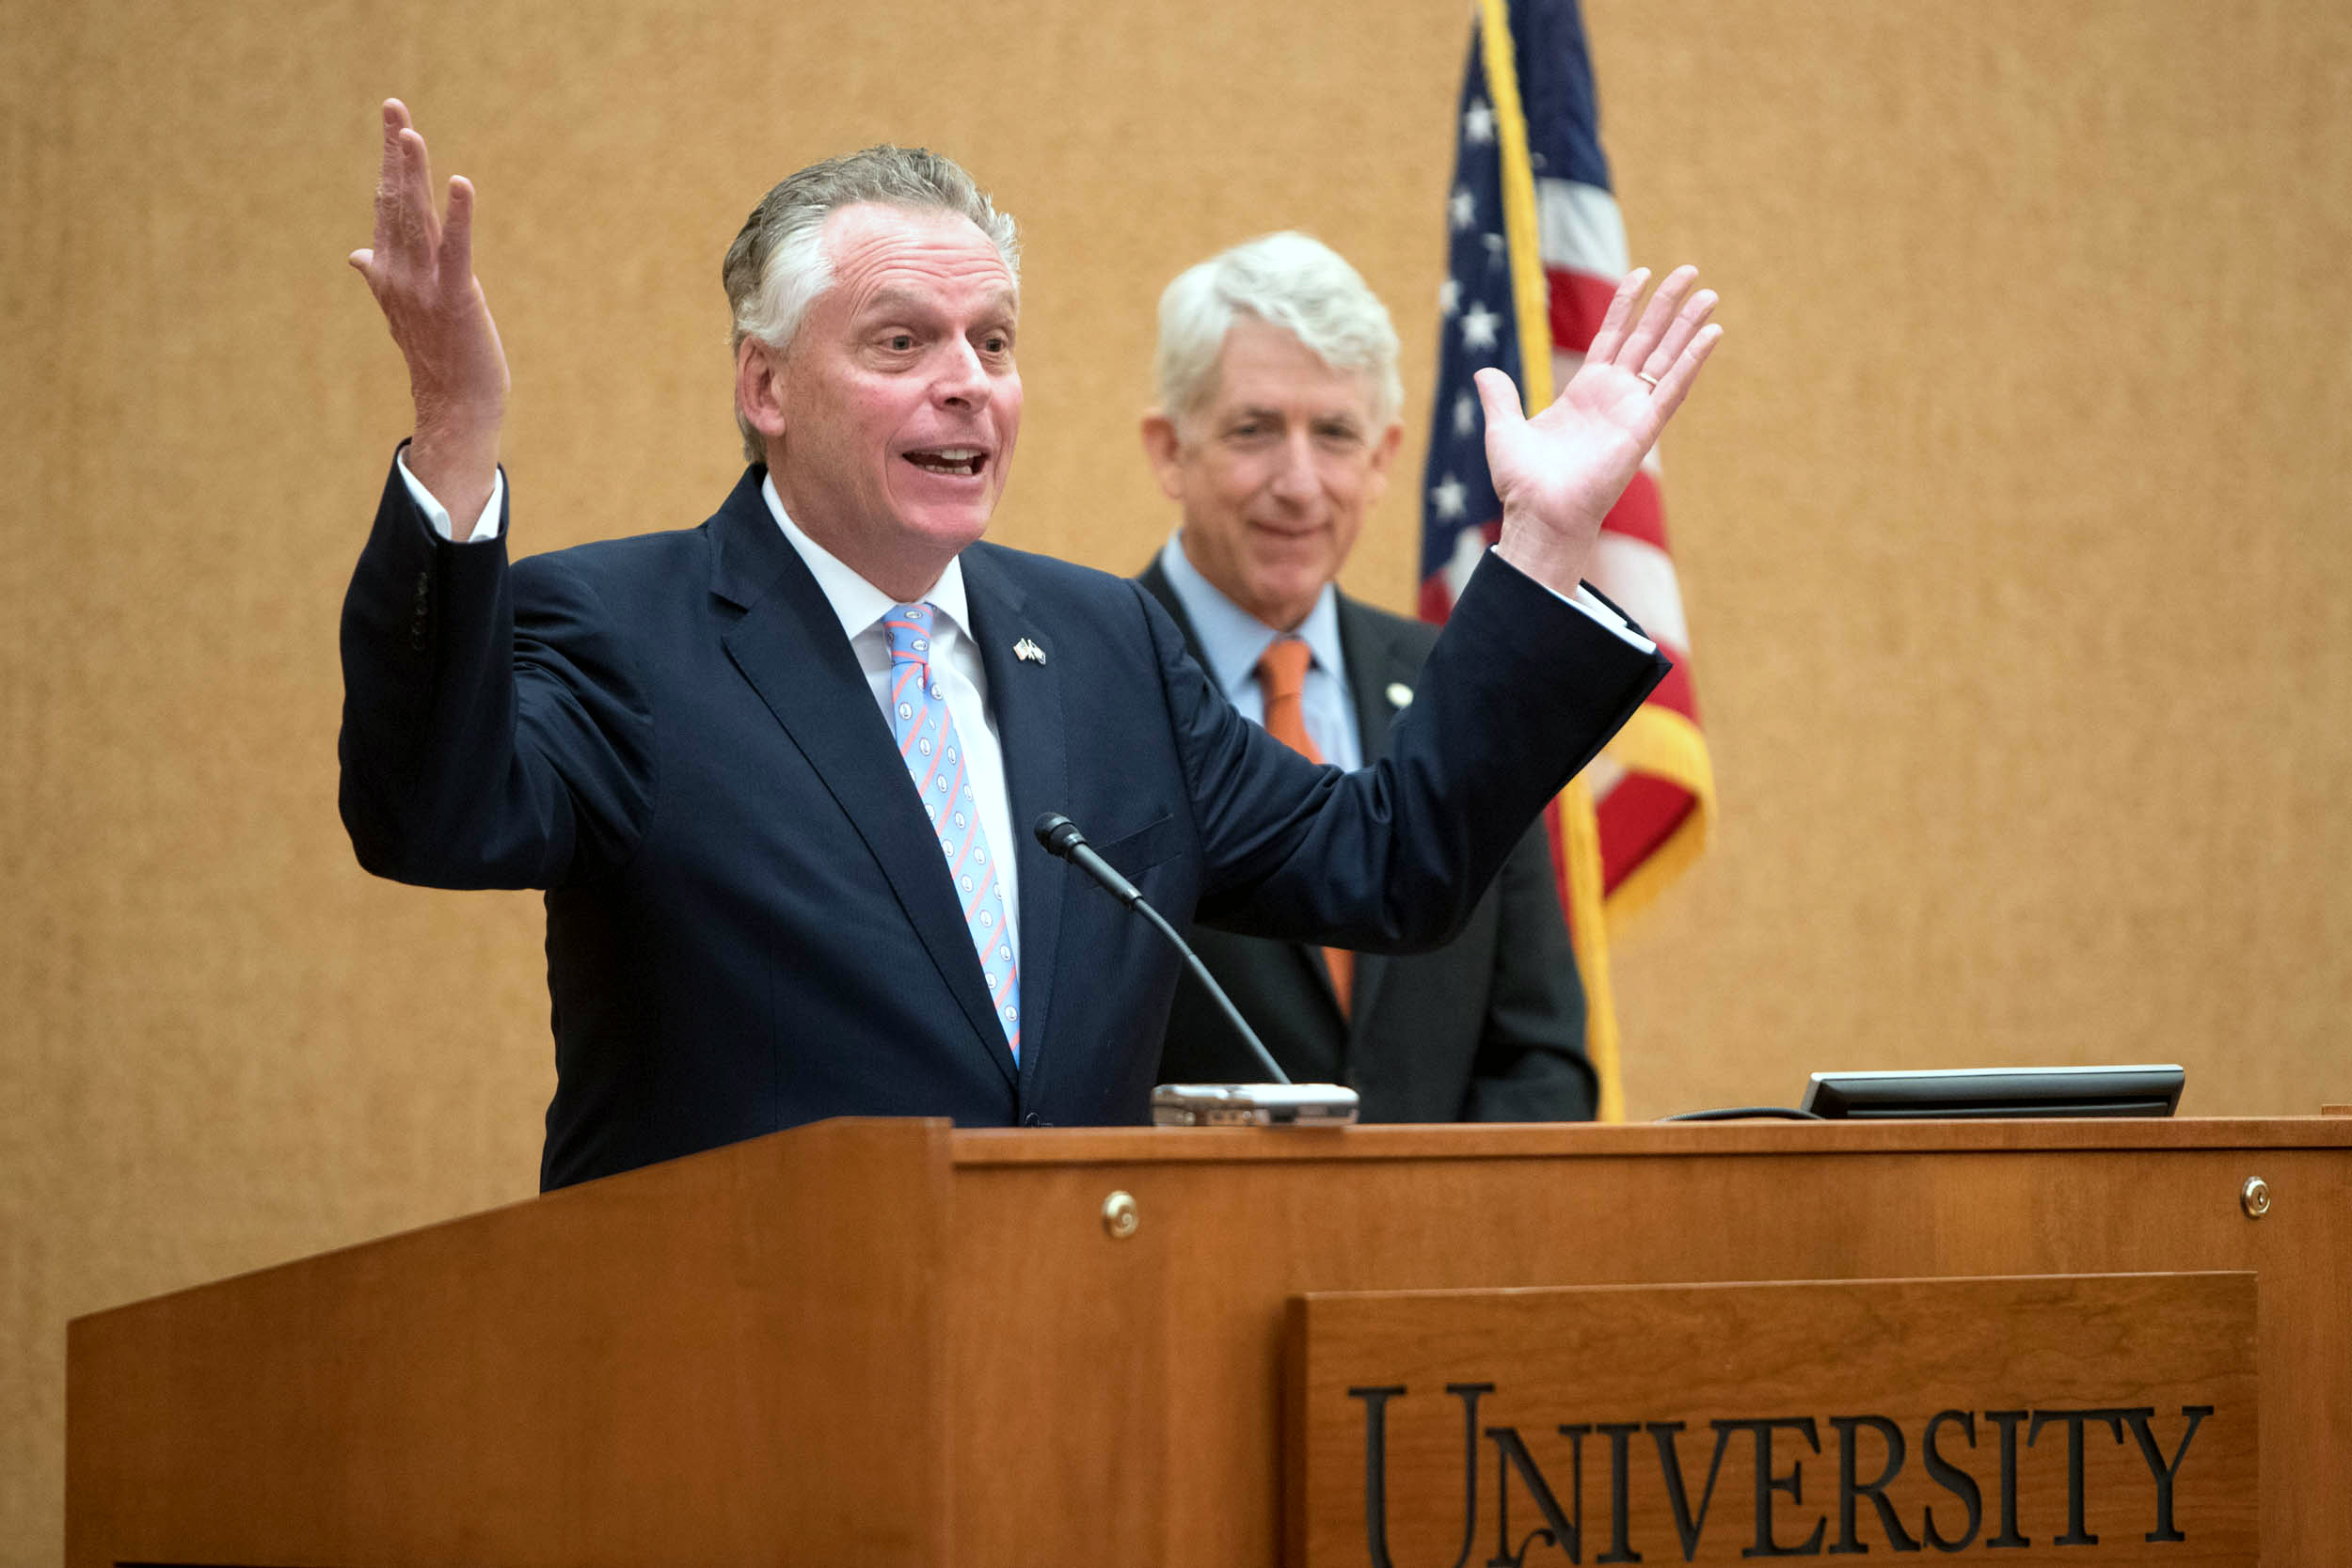 McAuliffe said extending protections to the LGBT population makes sense for civil rights and for business. 